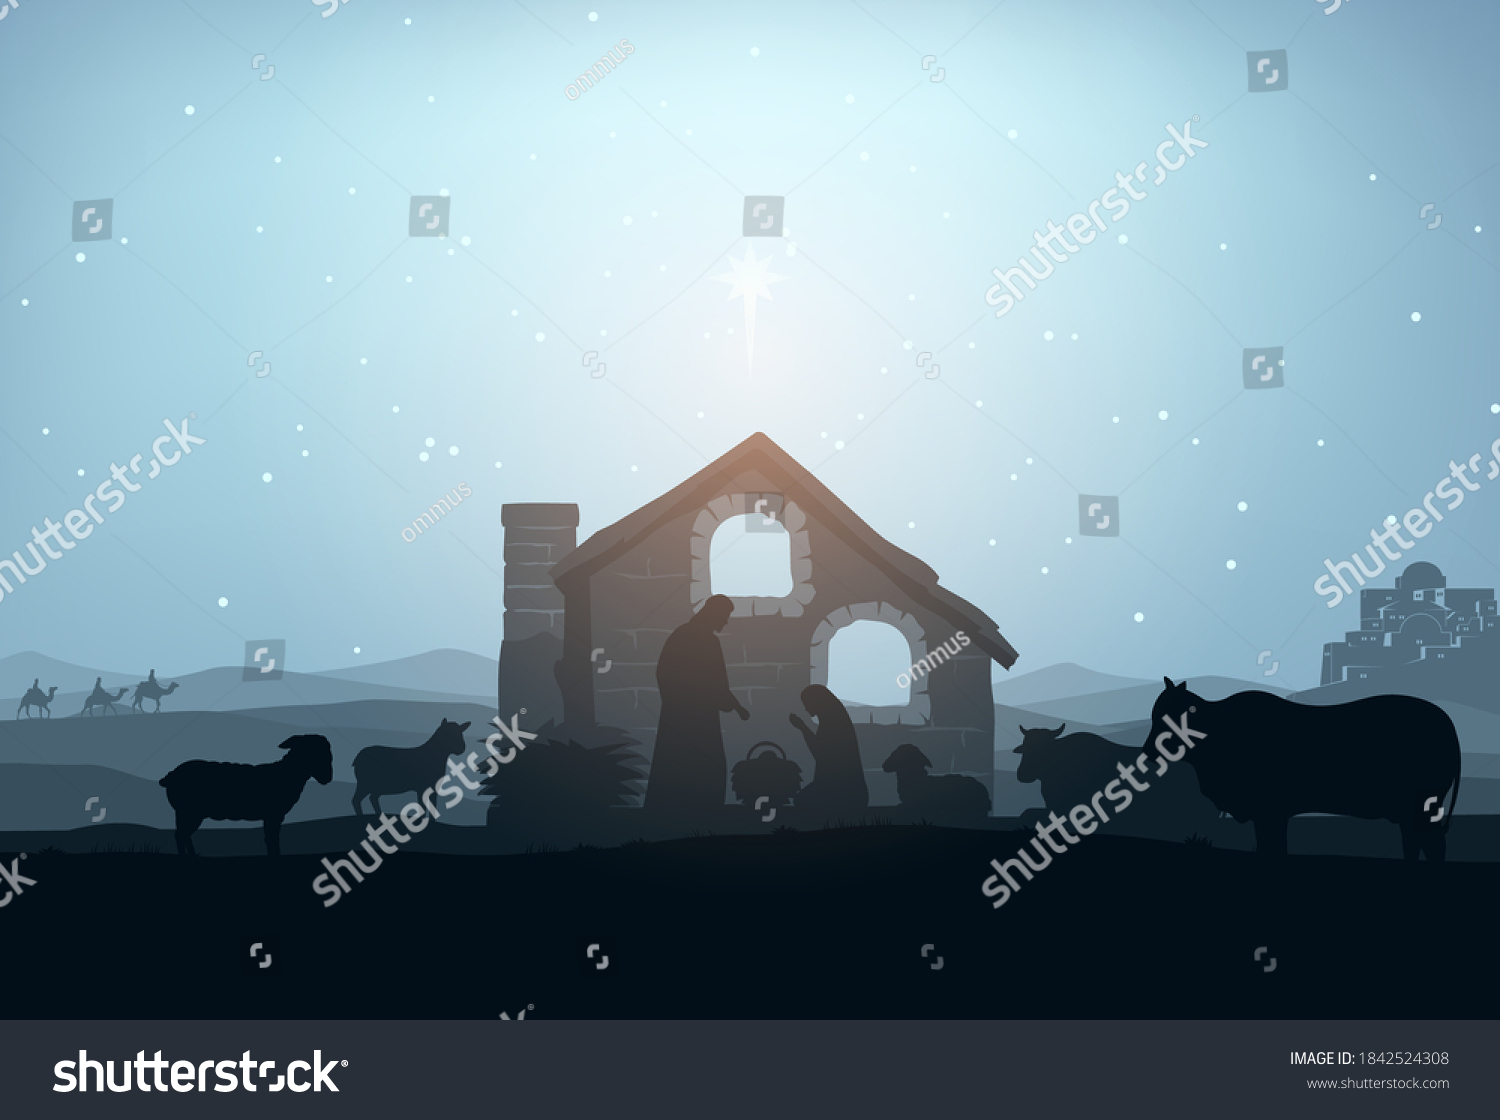 55,257 Native houses Images, Stock Photos & Vectors | Shutterstock